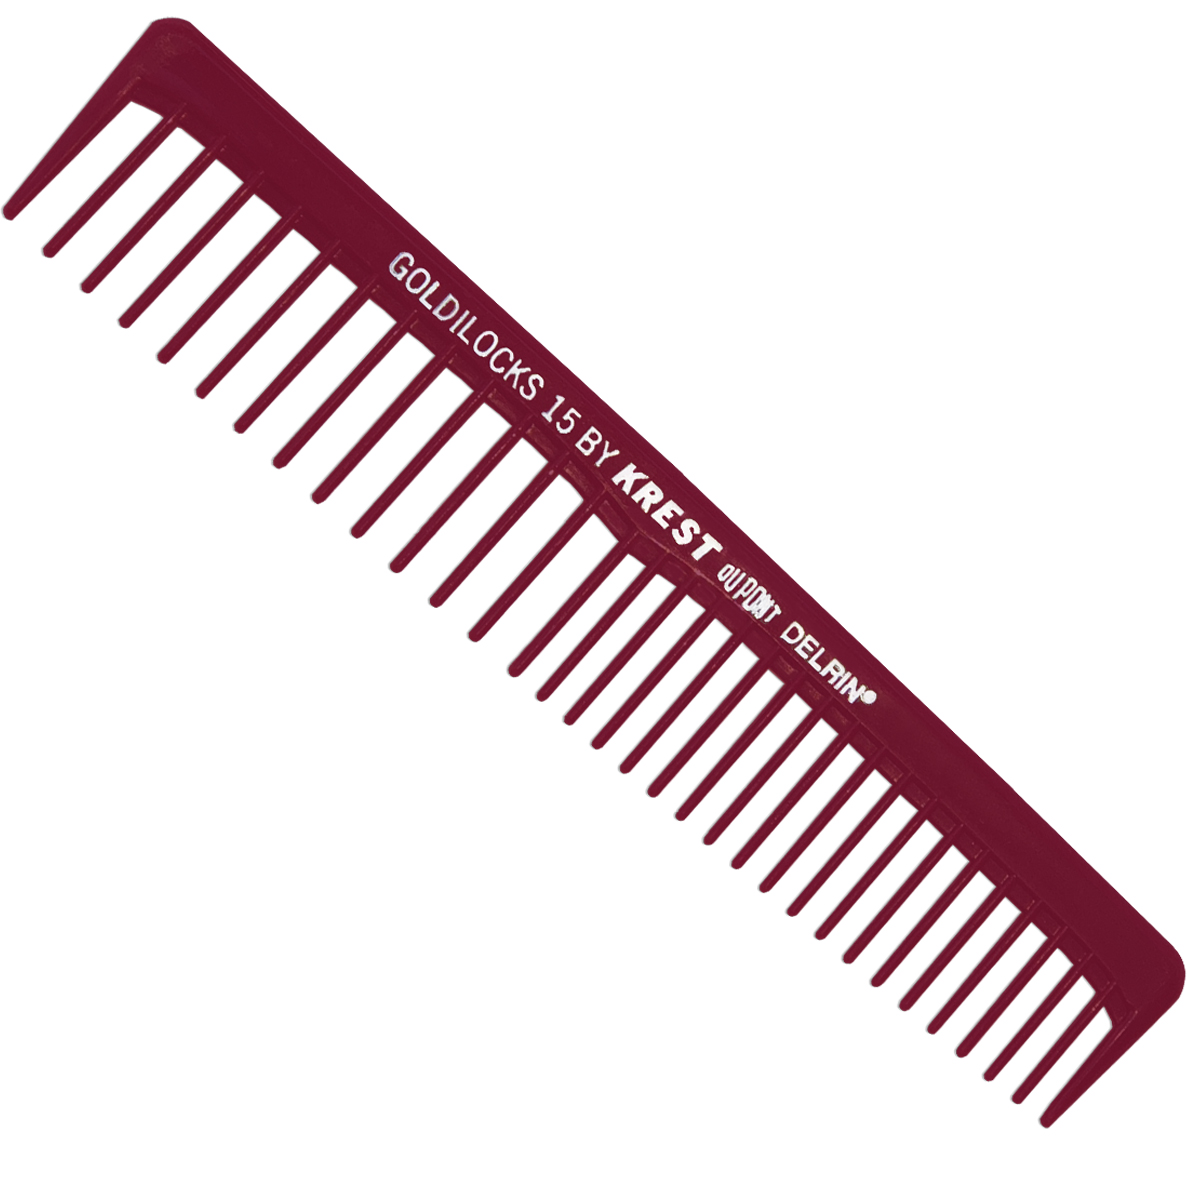 Space tooth finishing comb